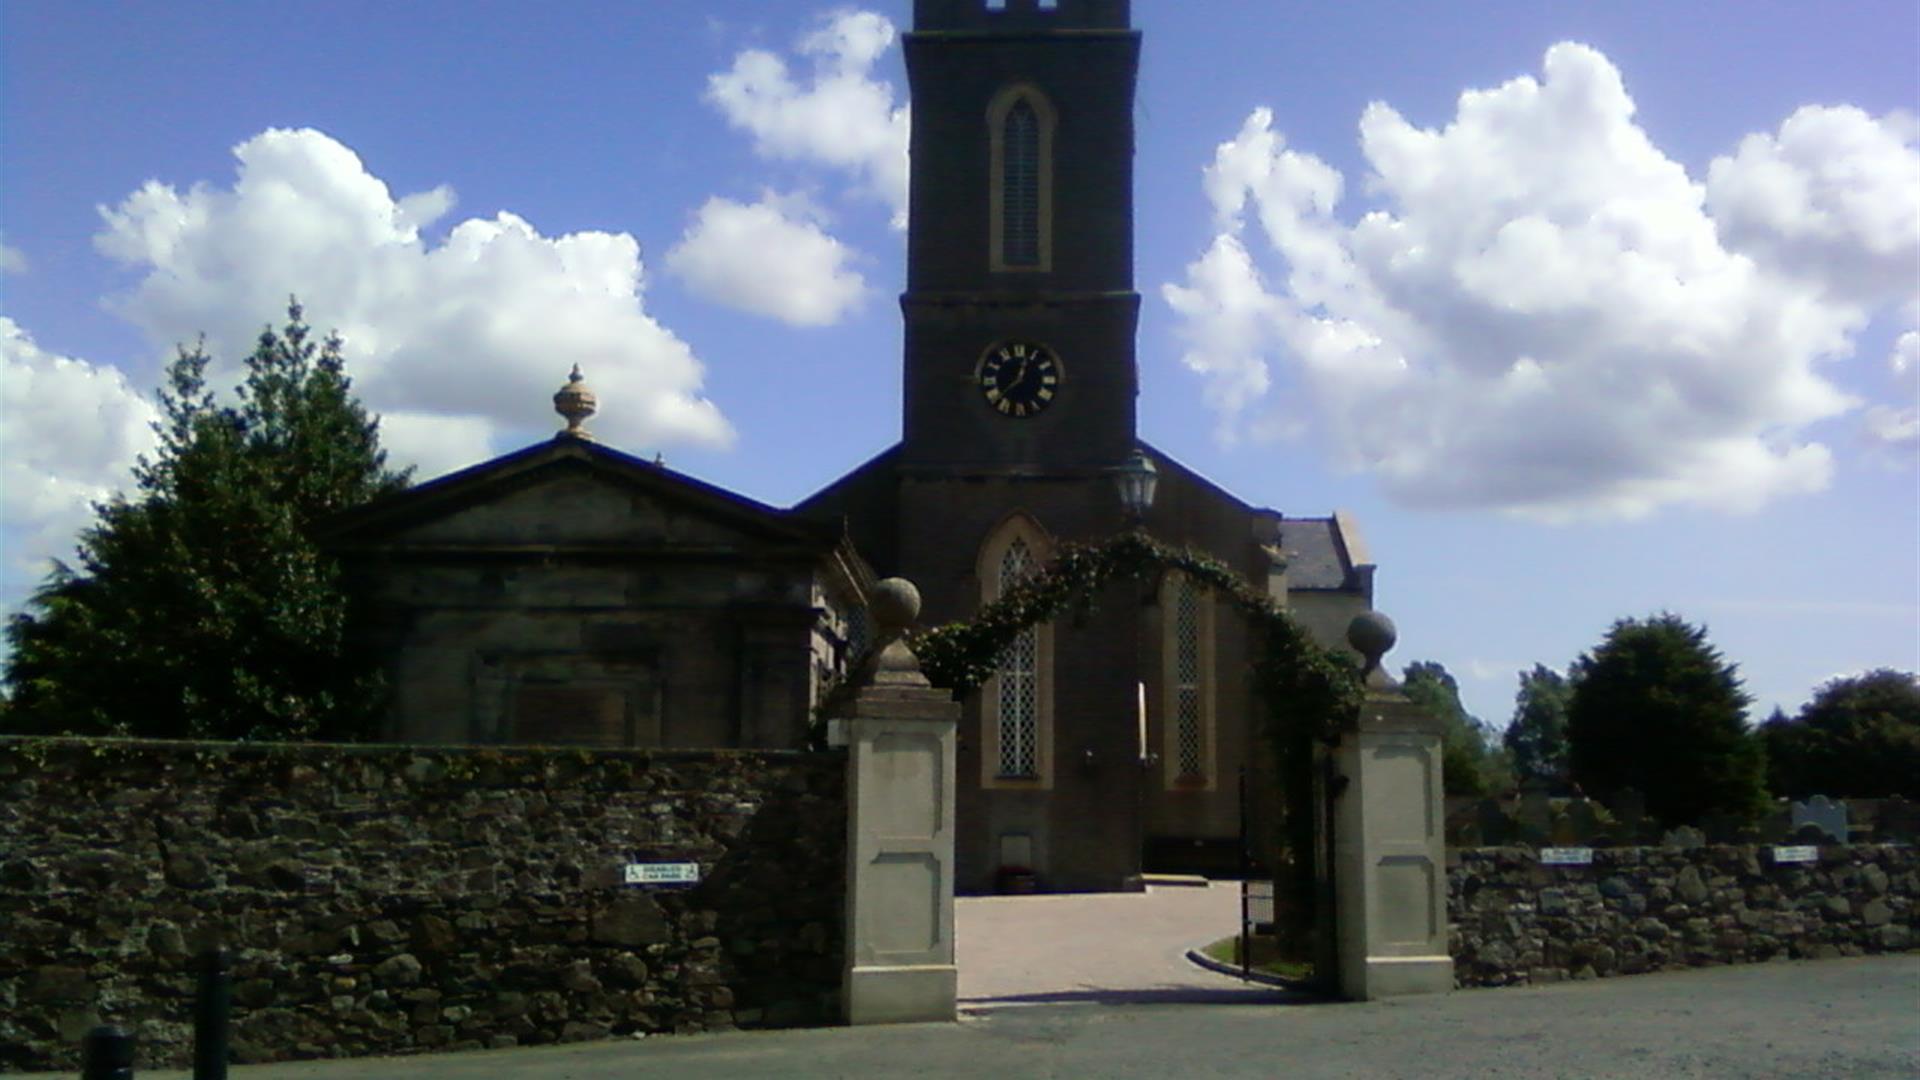 Photo of the Church from the car park, showing the entrance gates and arch way leading to the front doors of the church